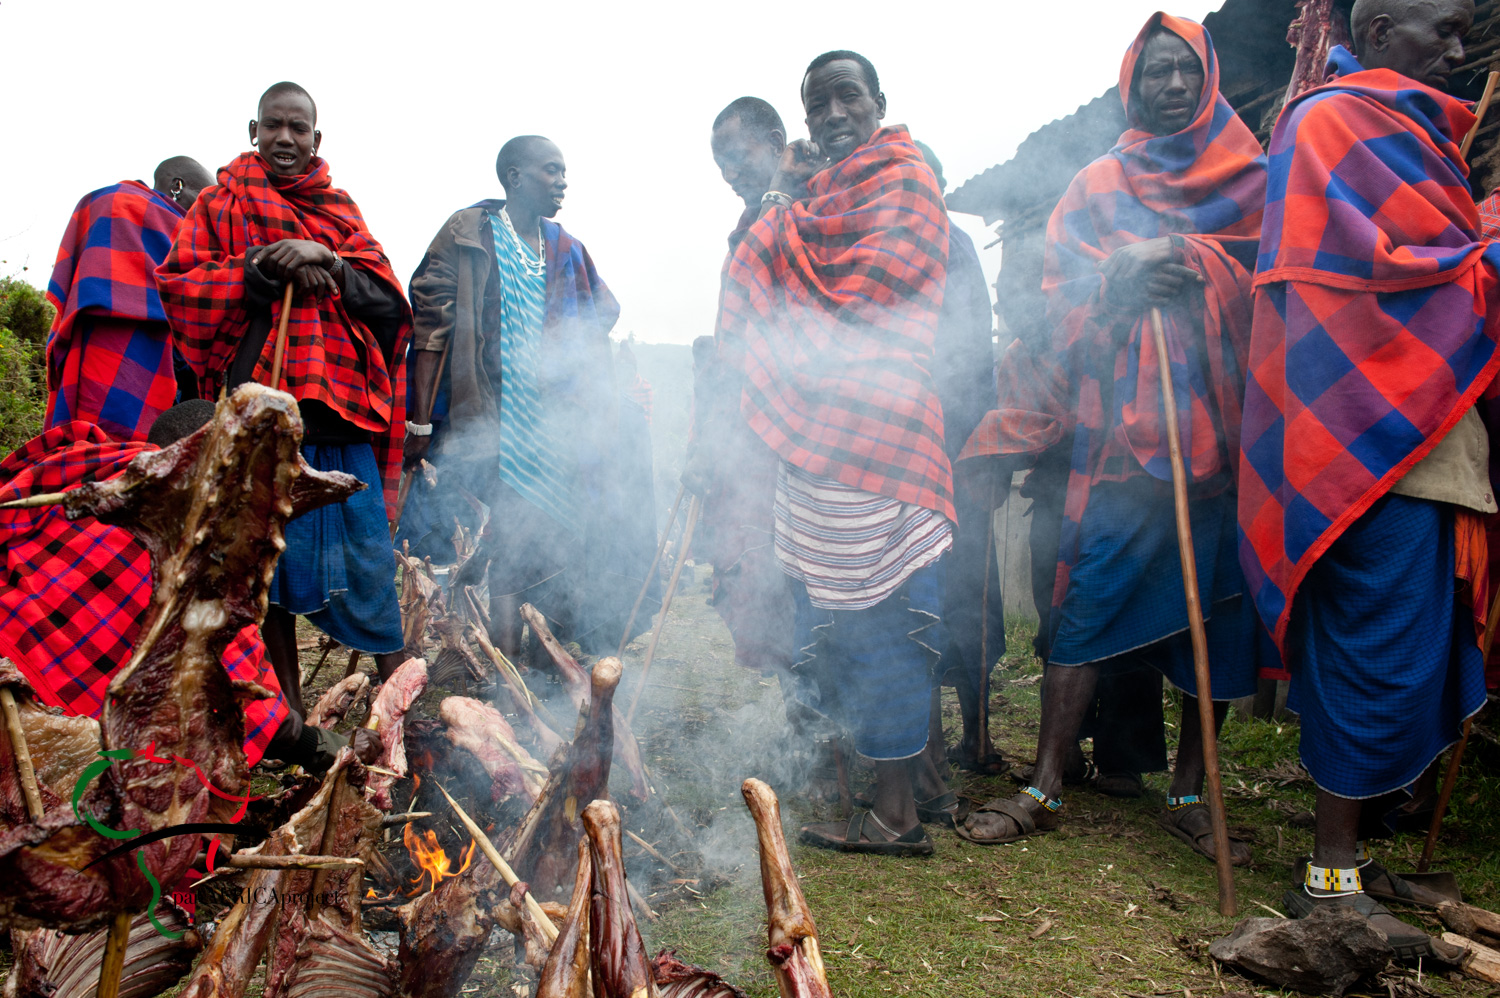 A group of Maasai people cooking meat